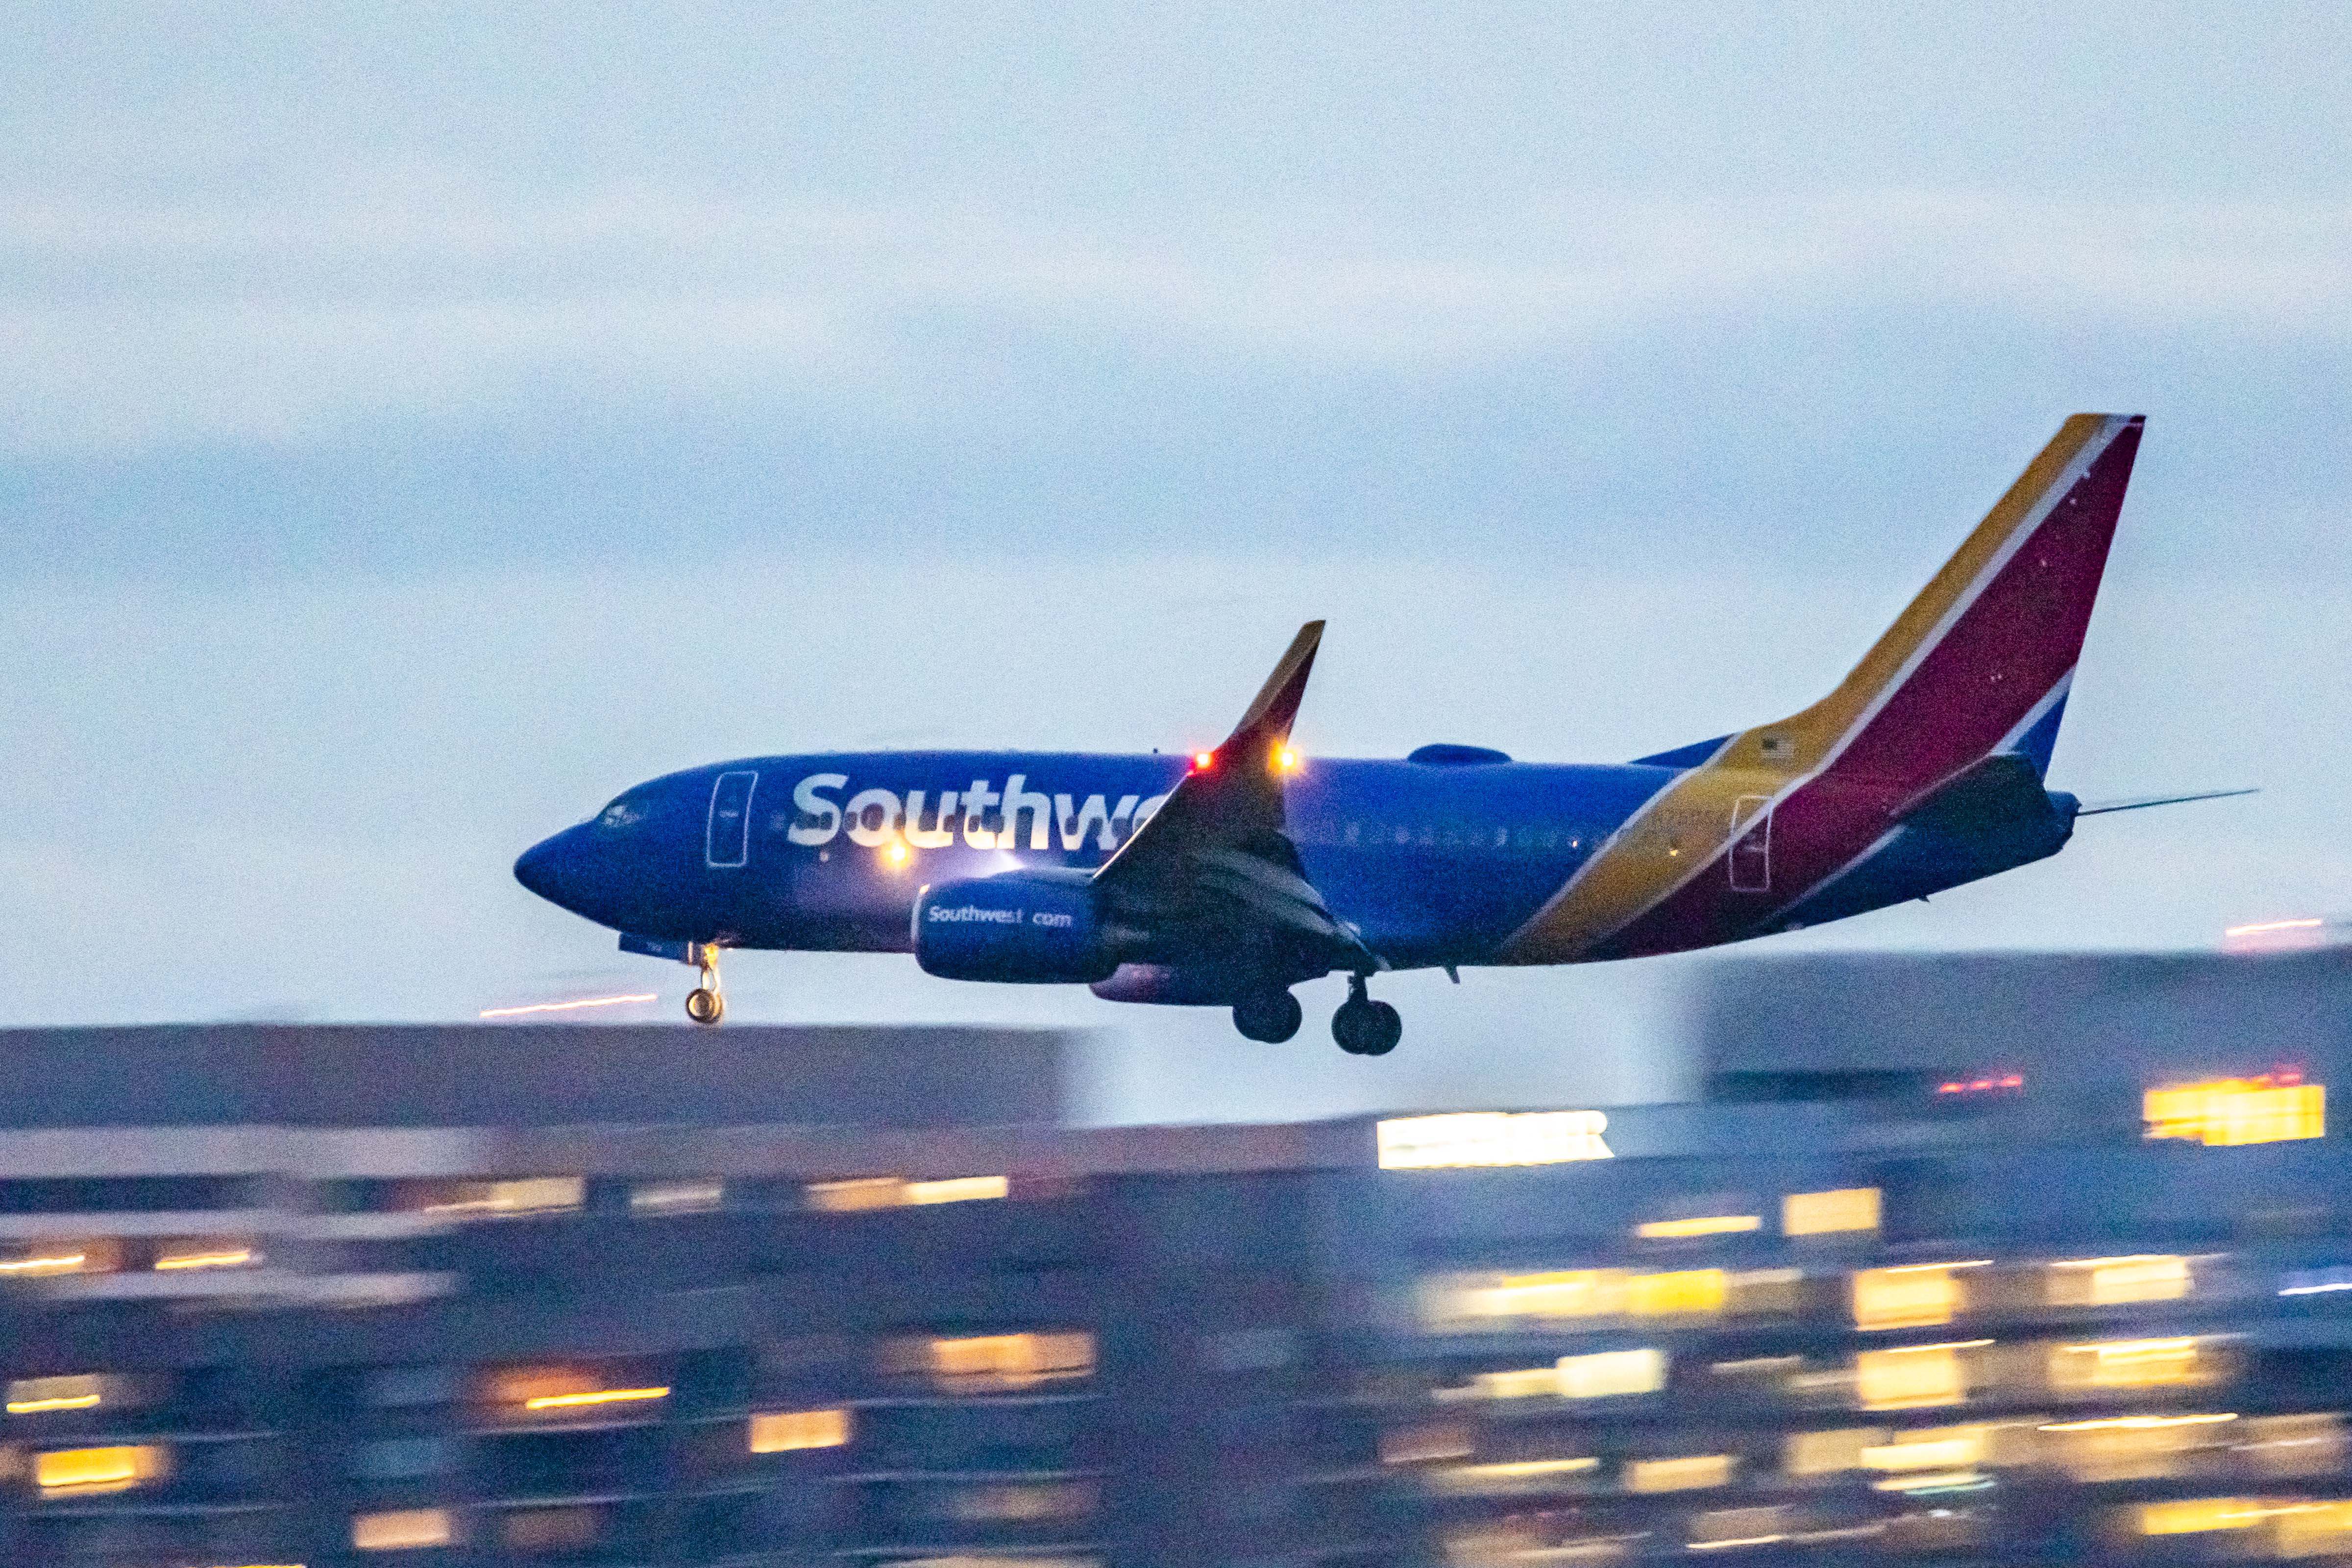 Southwest’s pilots union is nearing a preliminary labor agreement